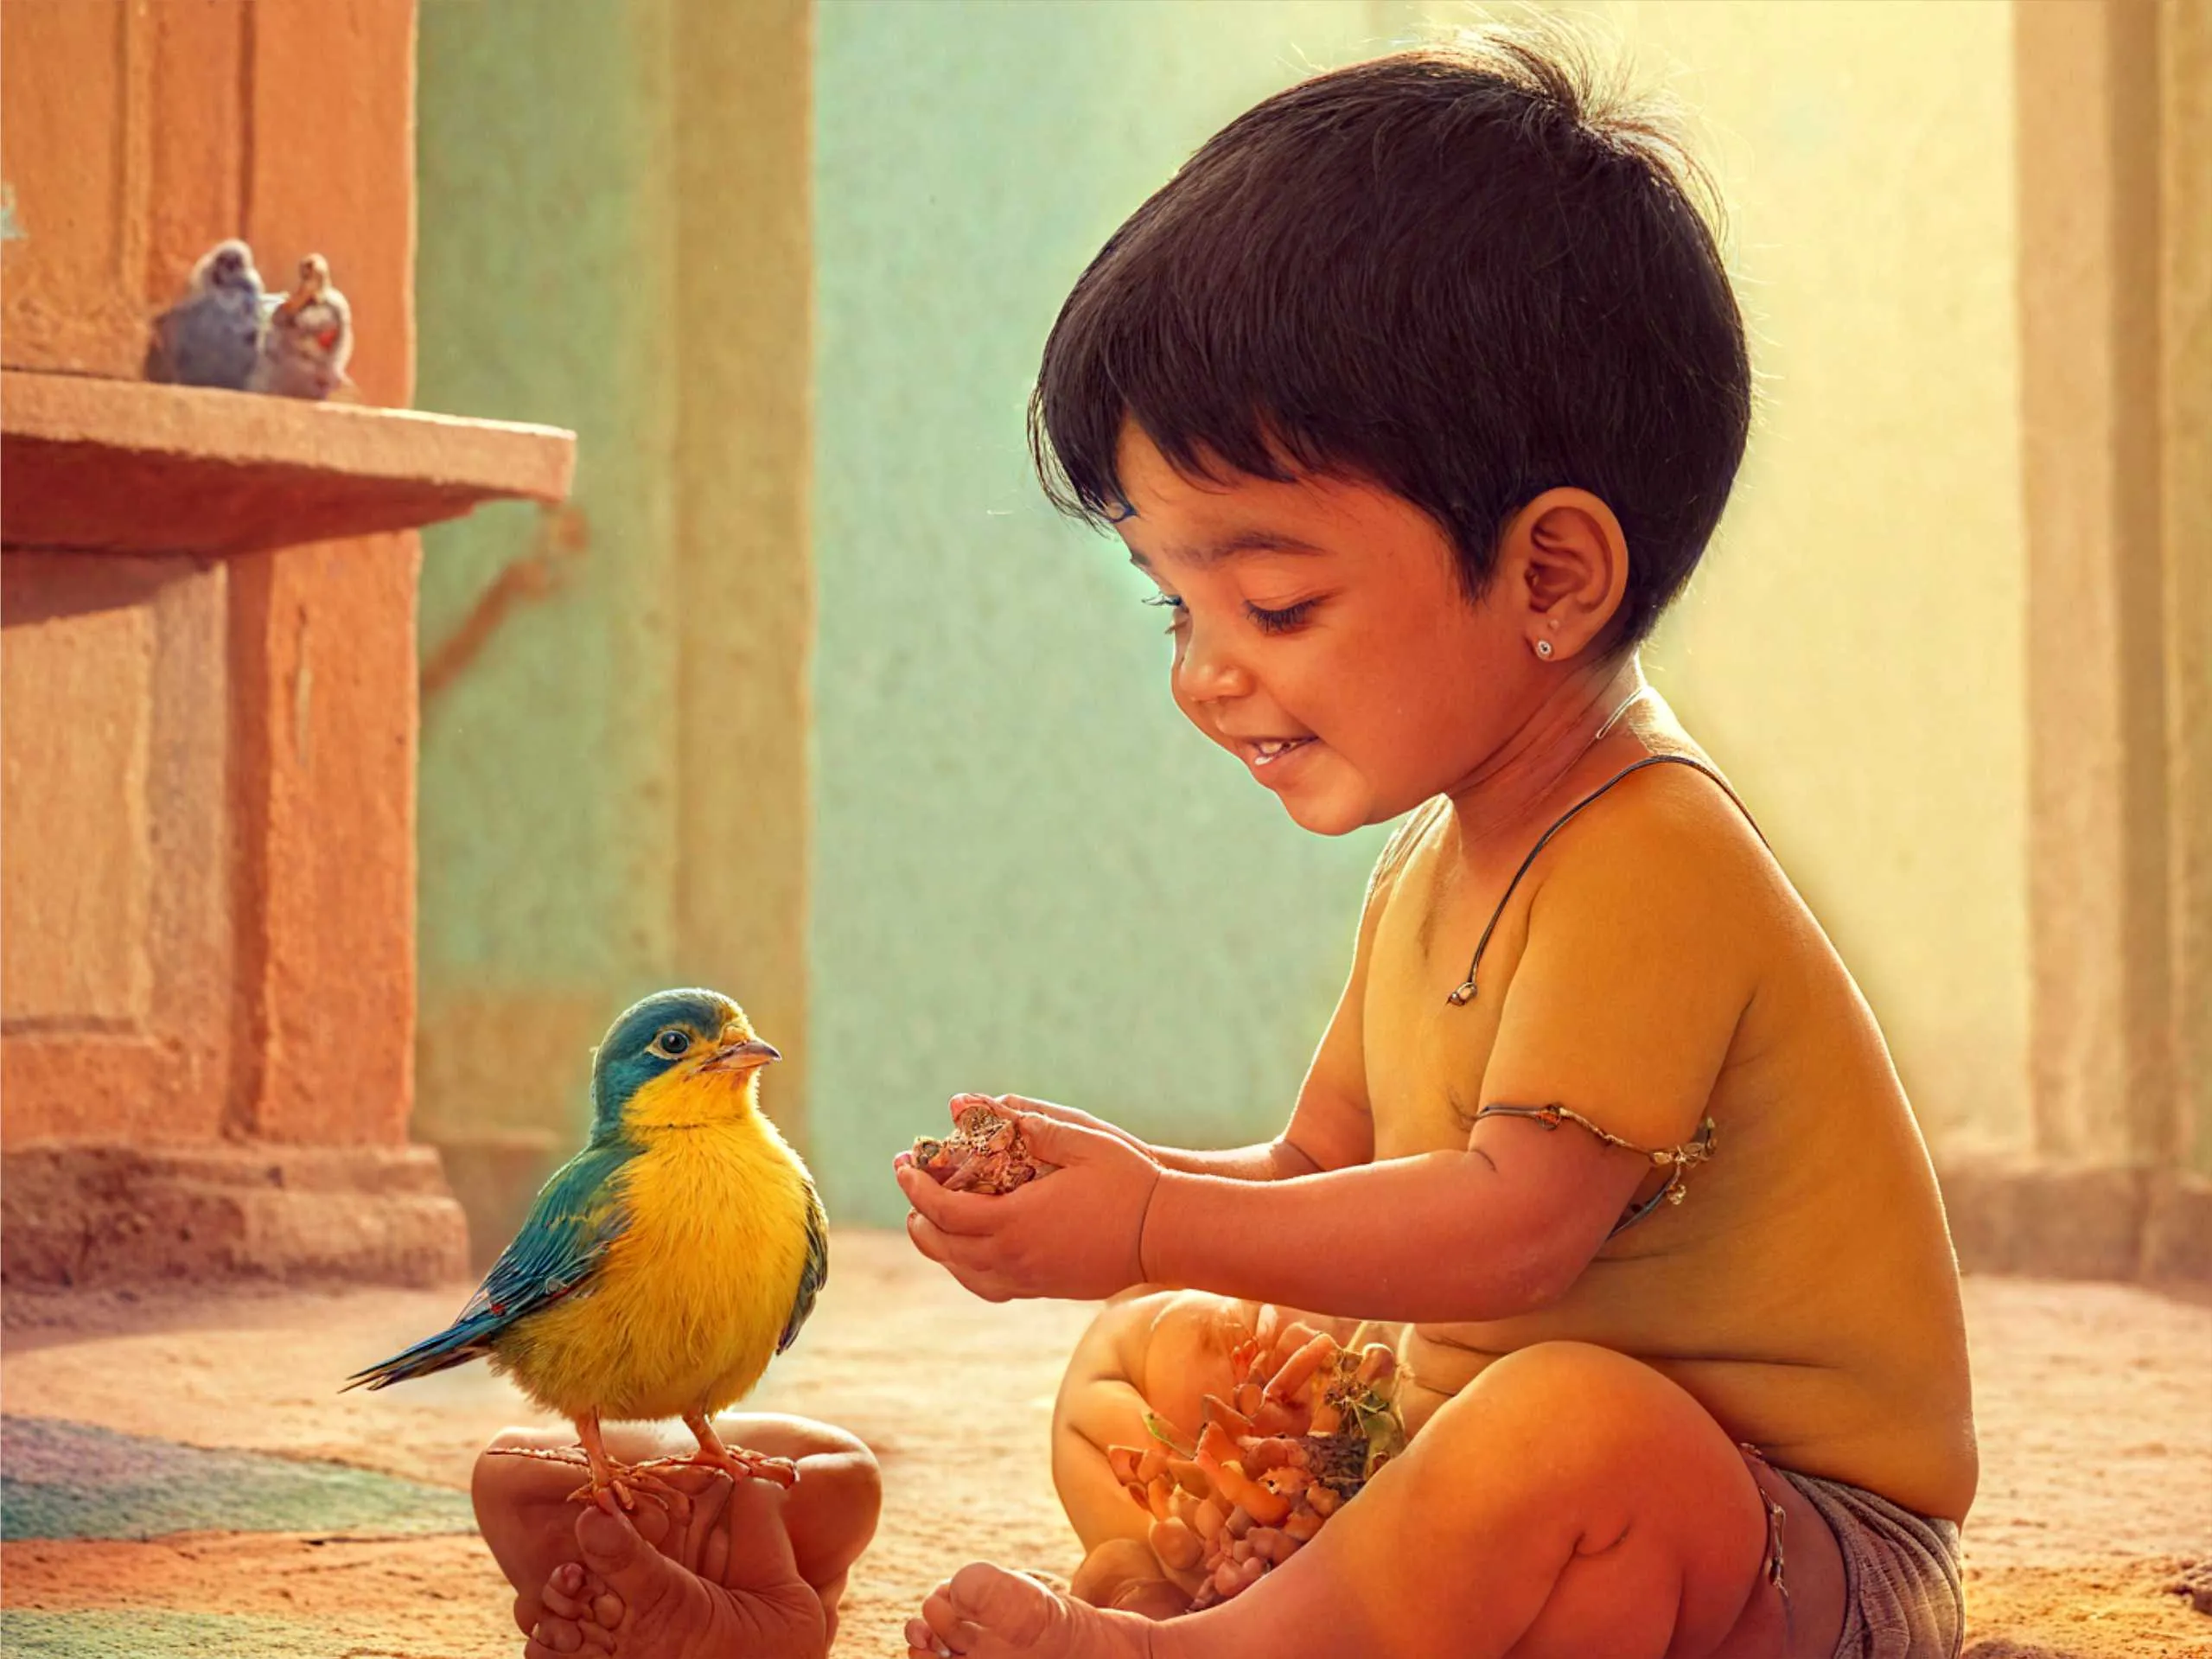 cartoon image of a kid playing with a bird